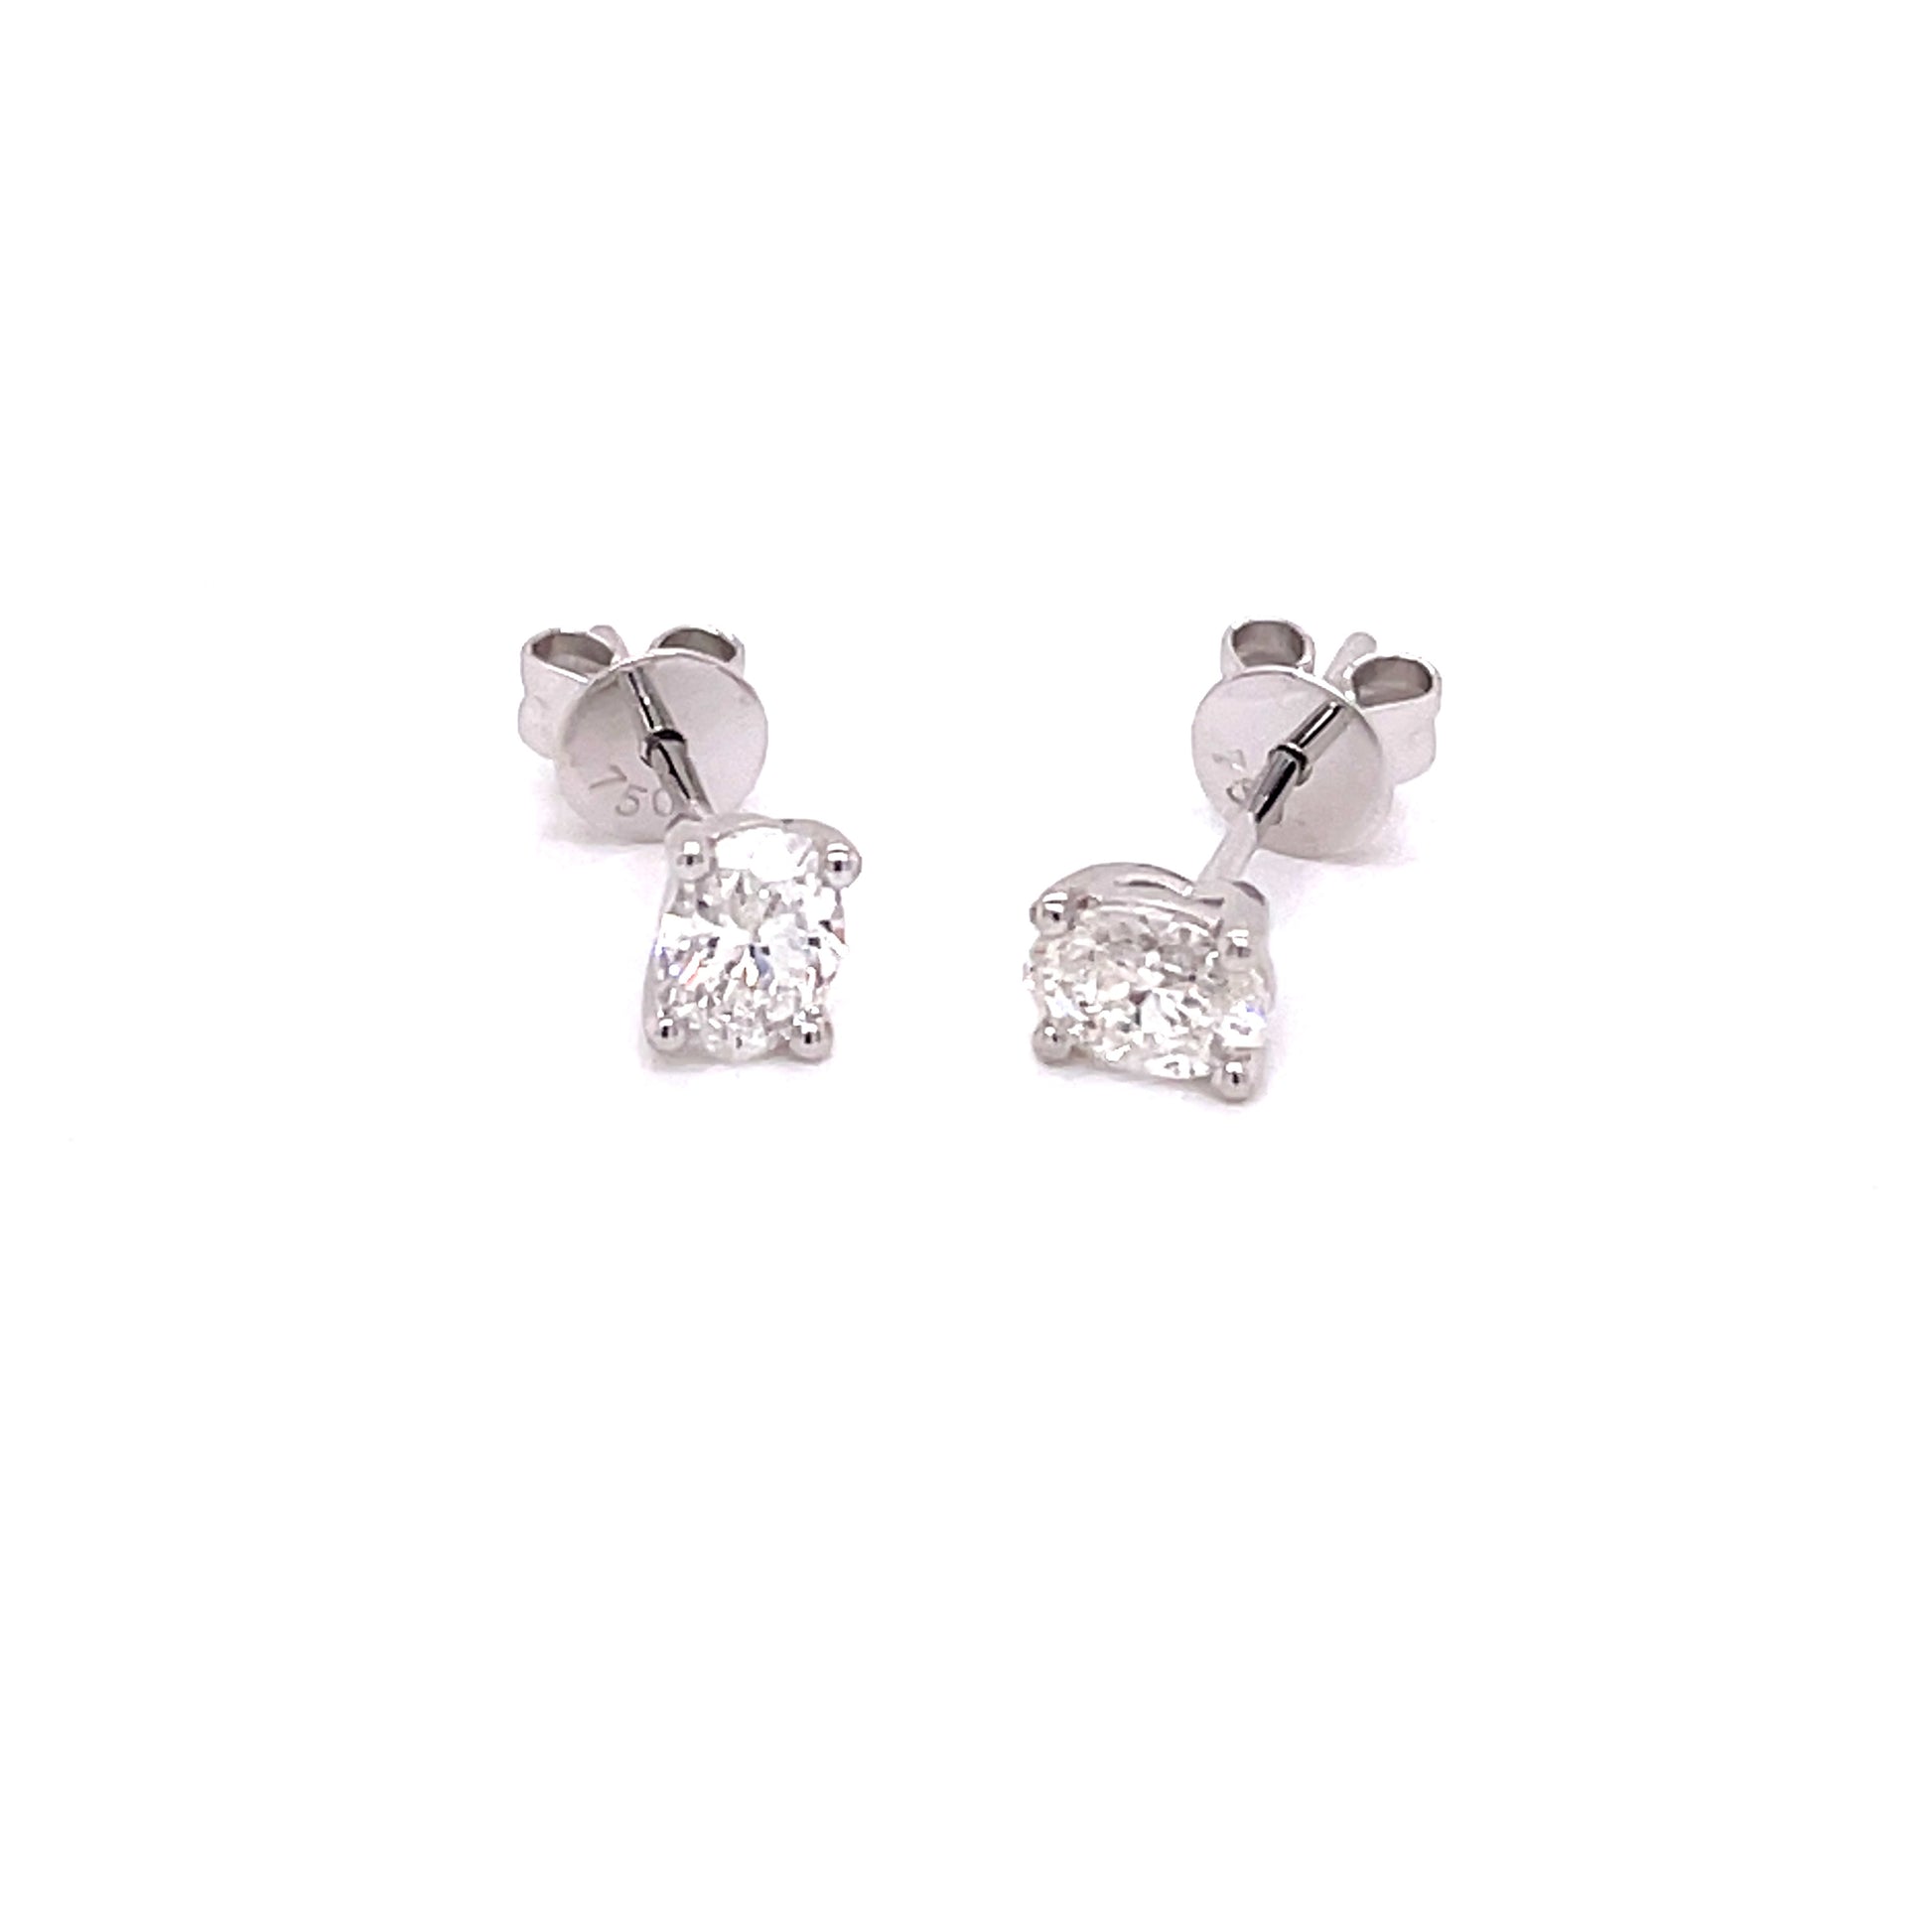 Oval Shaped Diamond Solitaire Earrings - 0.60cts  Gardiner Brothers   